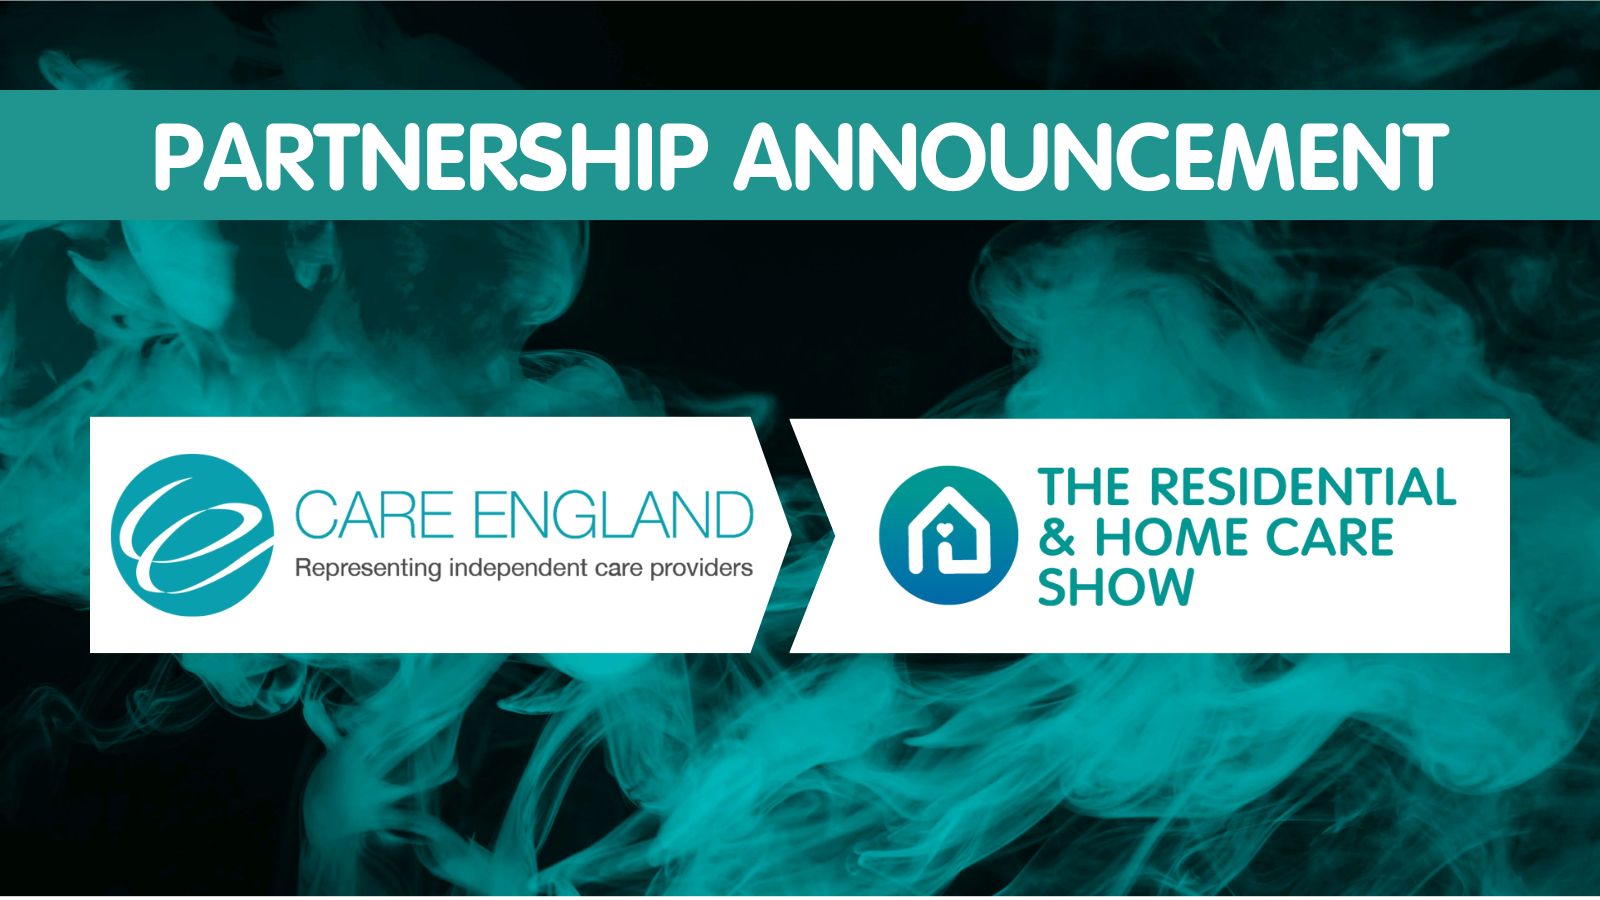 The Residential & Home Care Show